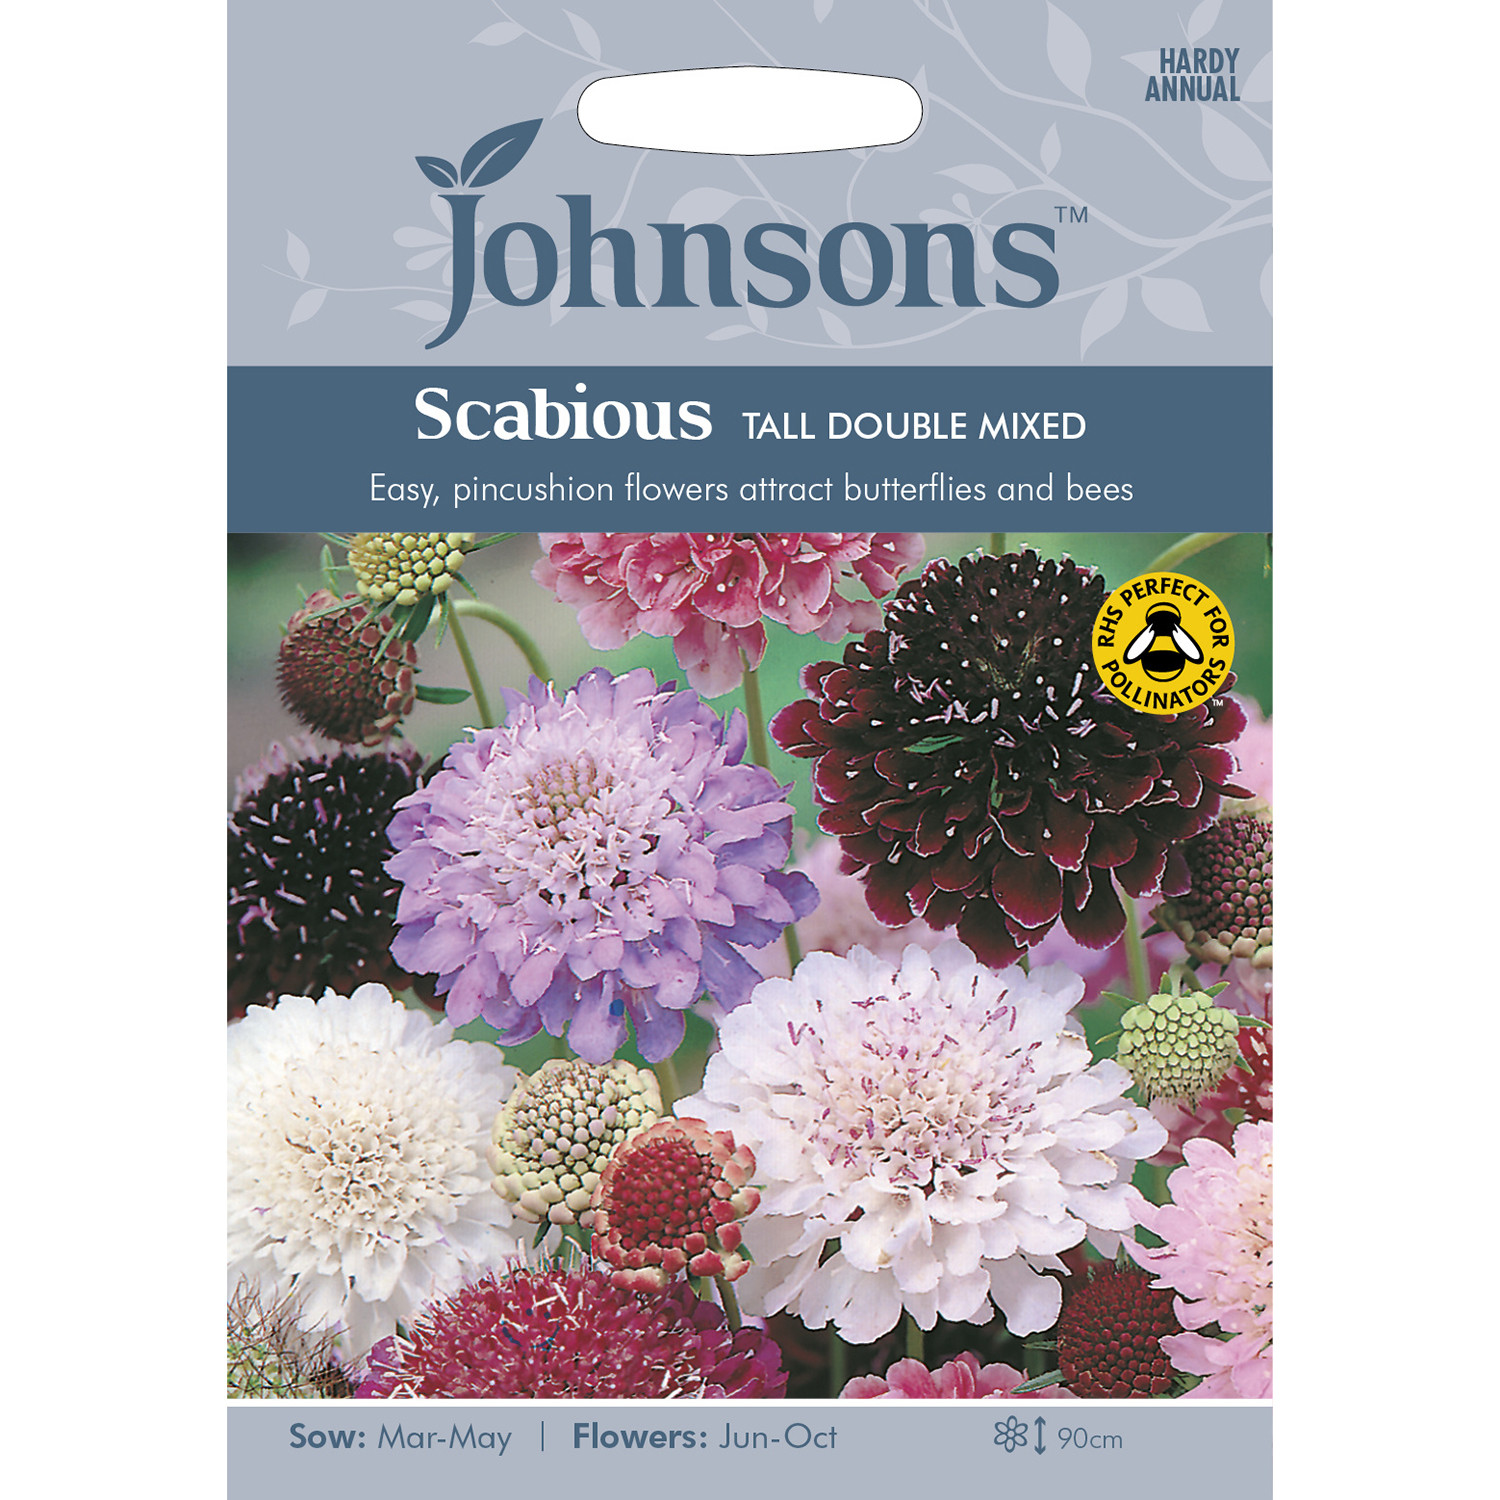 Johnsons Scabious Tall Double Mixed Flower Seeds Image 2